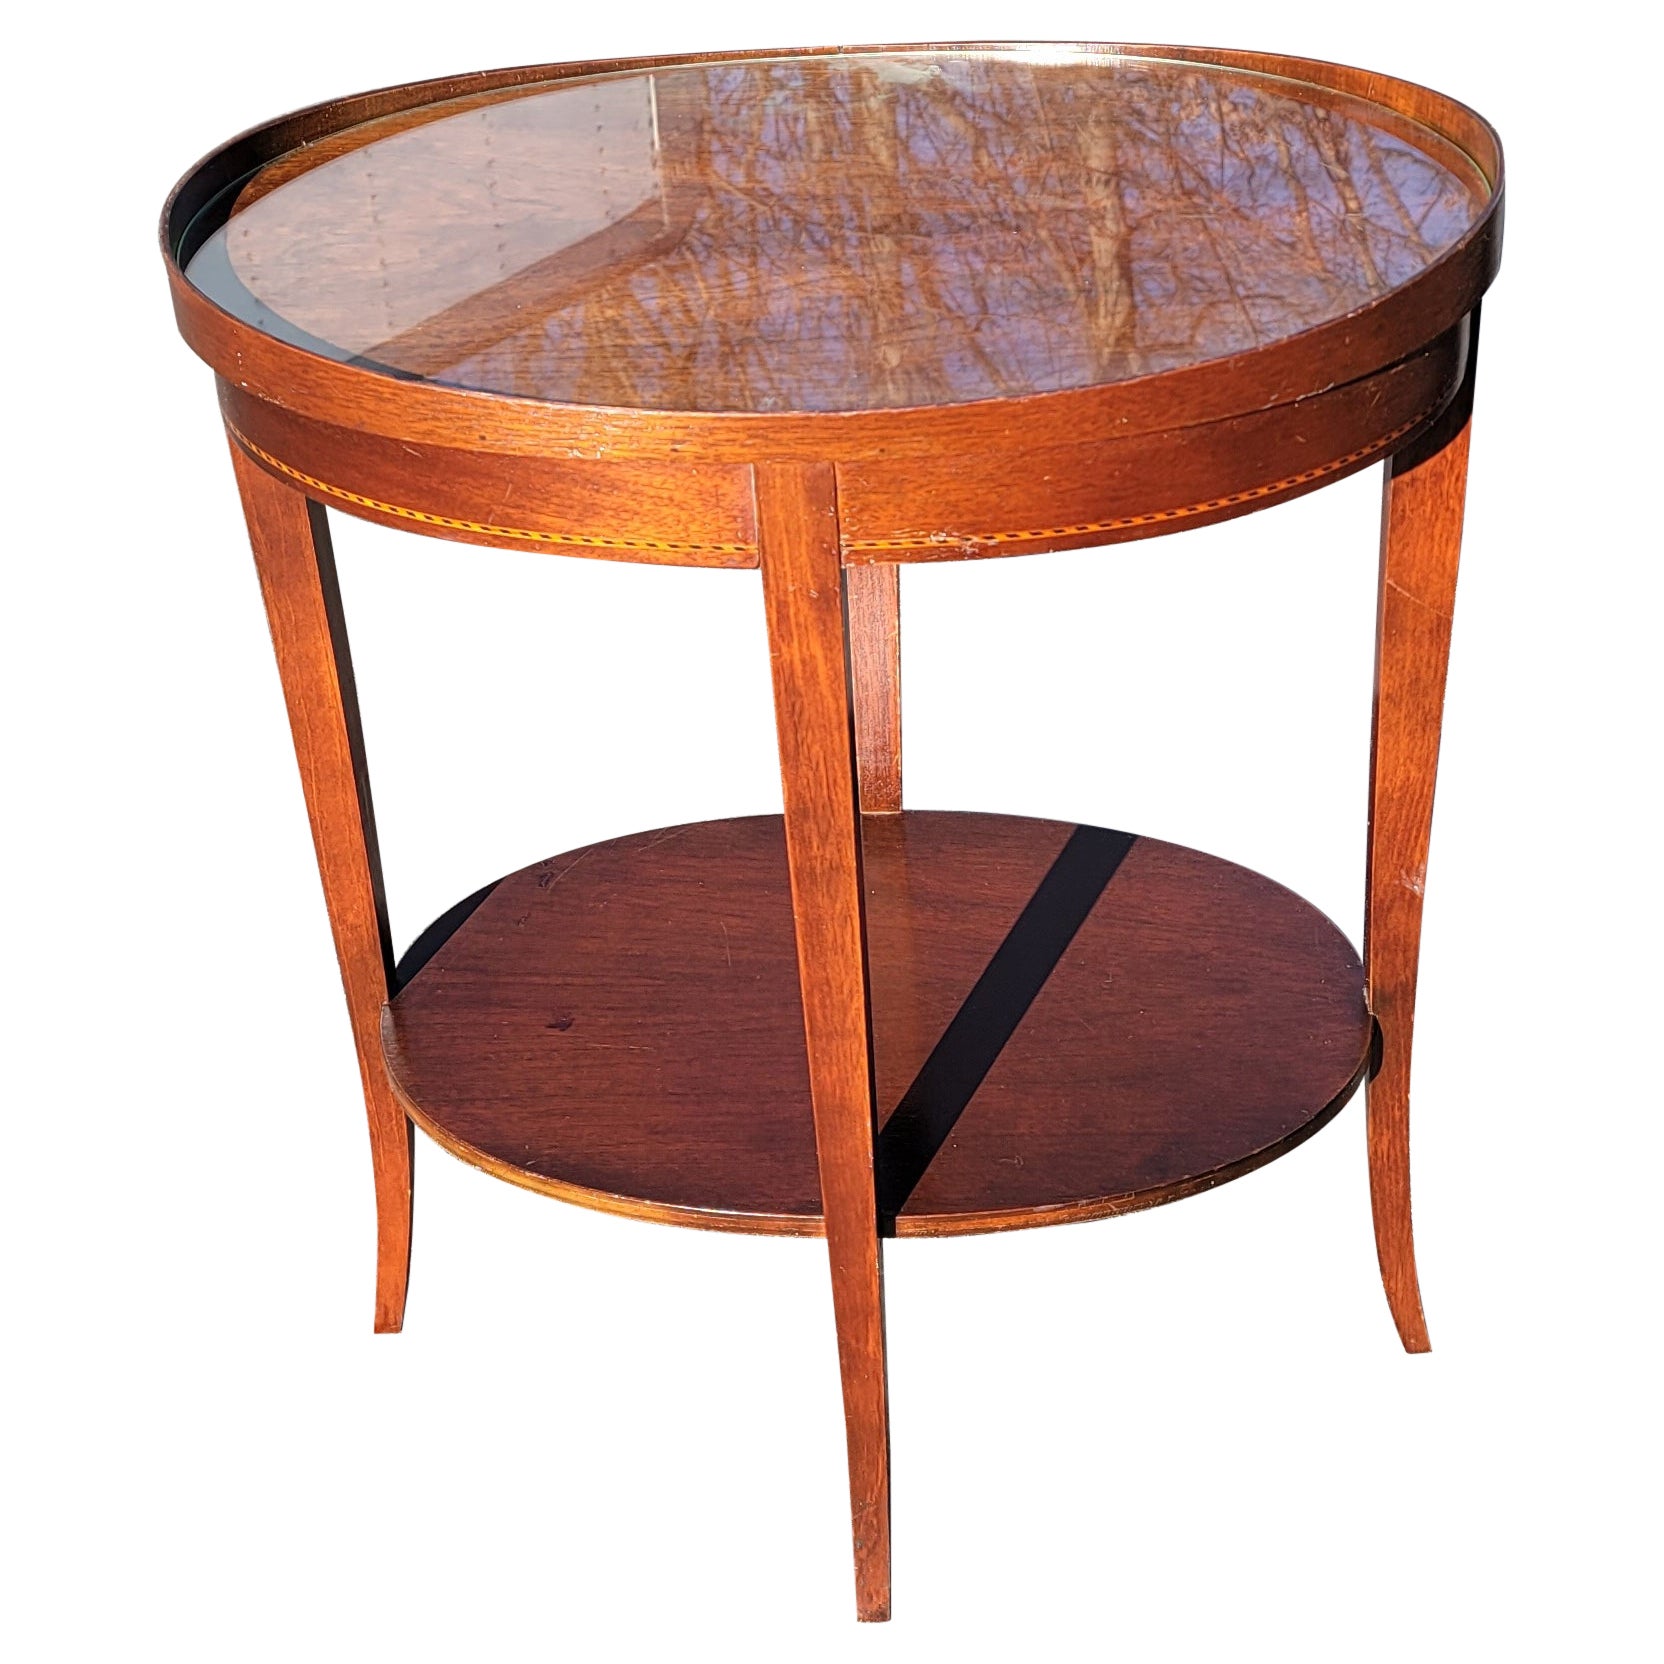 Mersman Tiered Mahogany Inlay Oval Side Table W/ Protective Glass Top